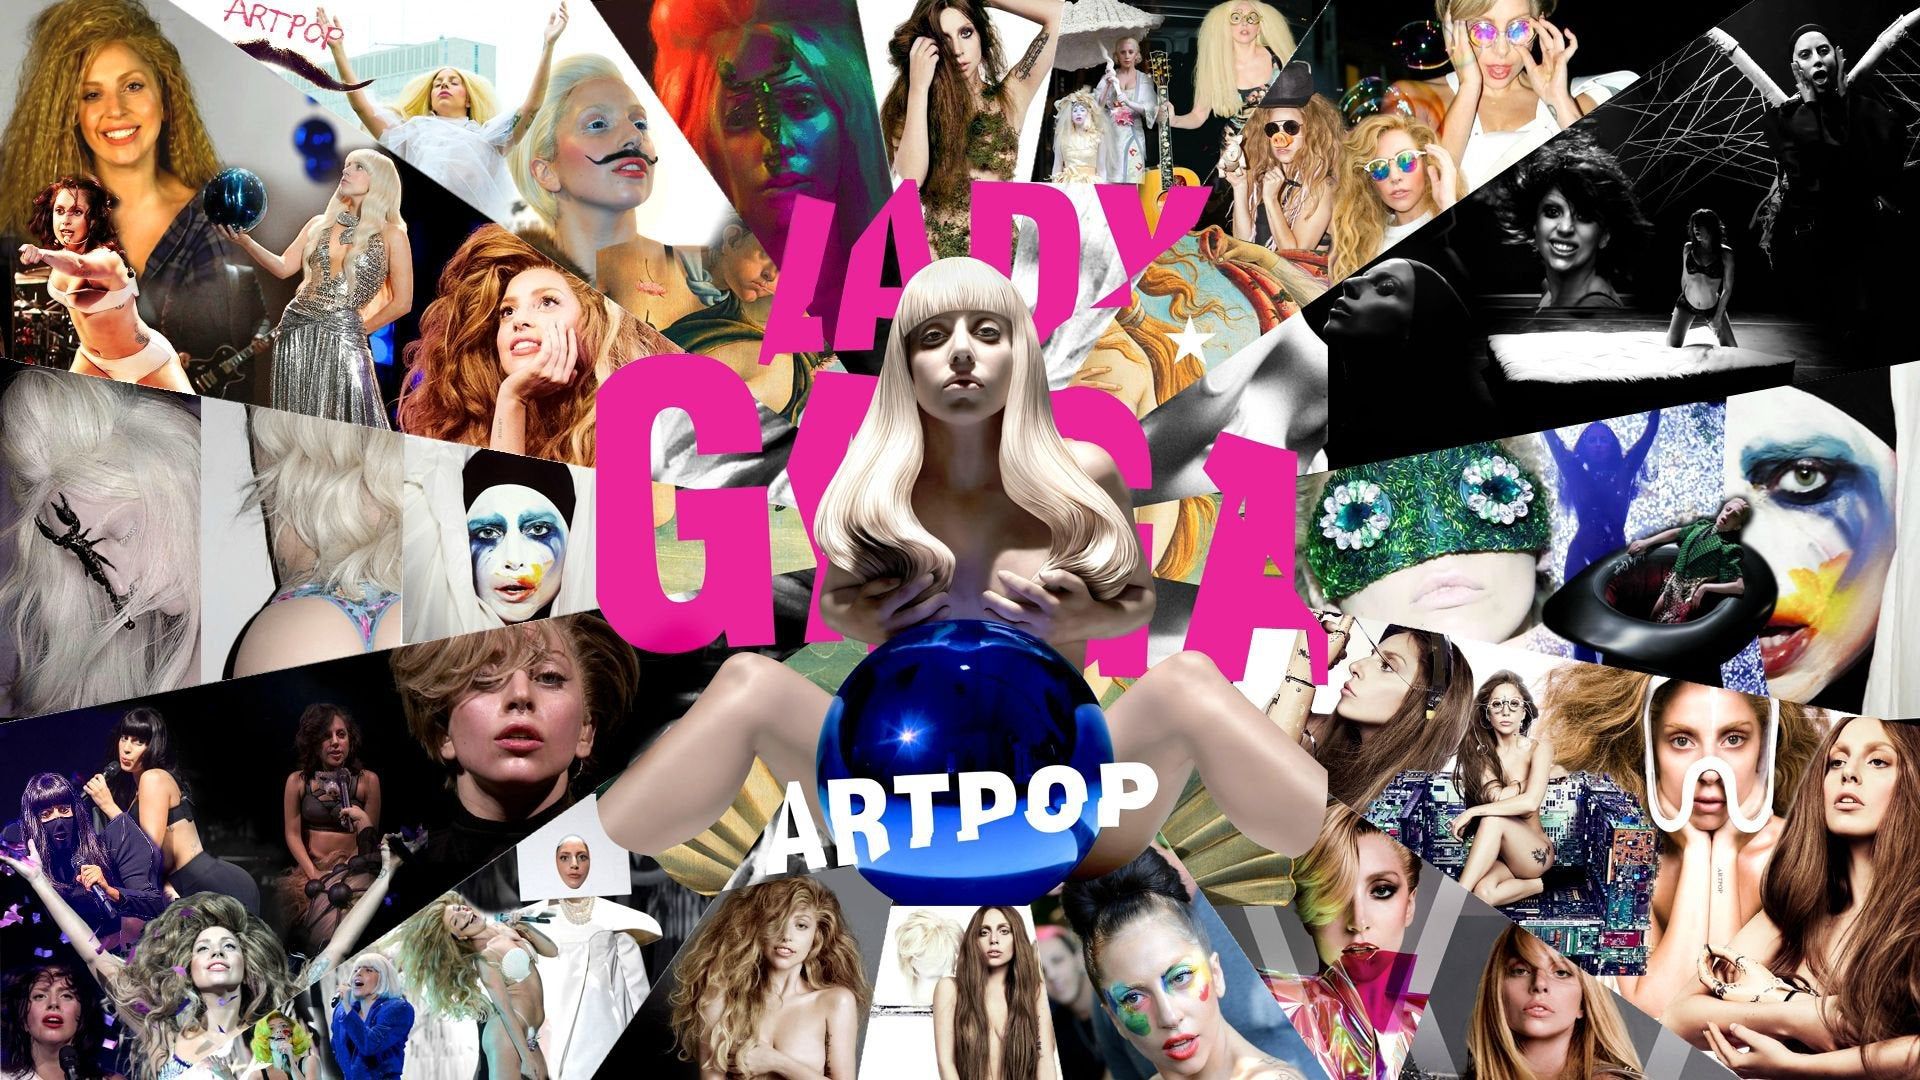 Five years ago, an Artistic Revolution Through Potentials Of Pop